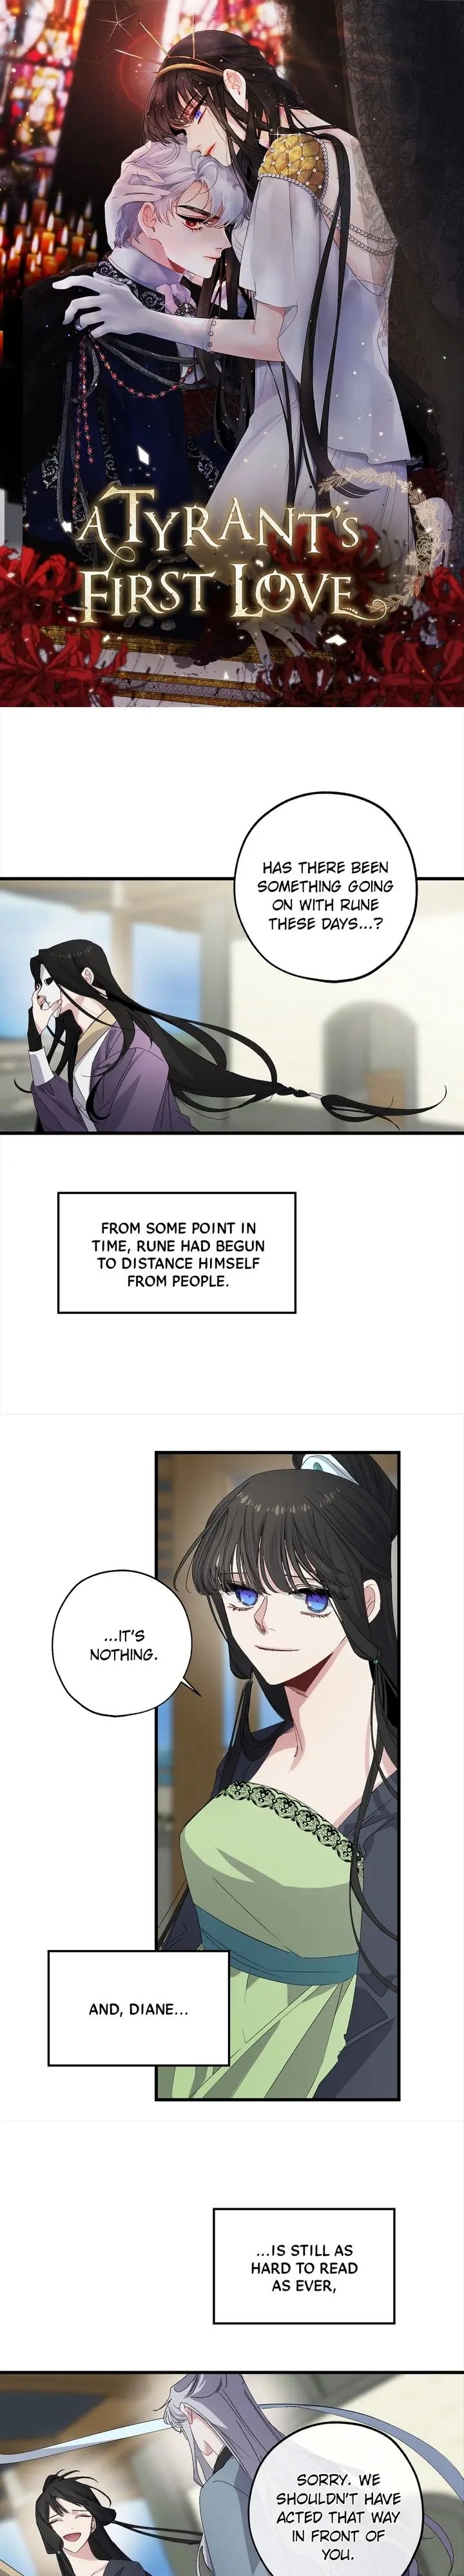 The Tyrant's First Love - Page 1